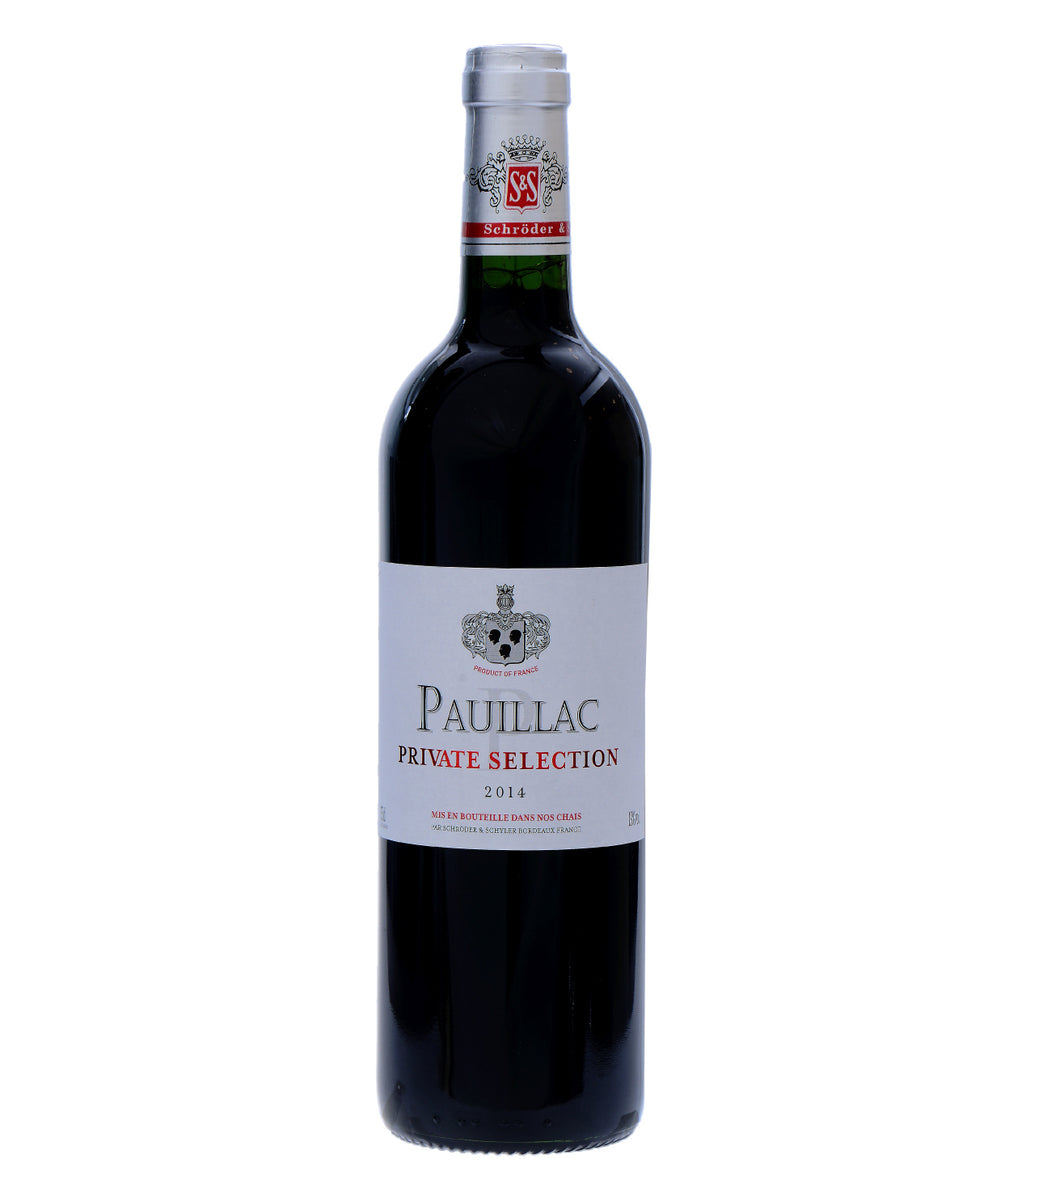 Pauillac Private Selection 2014